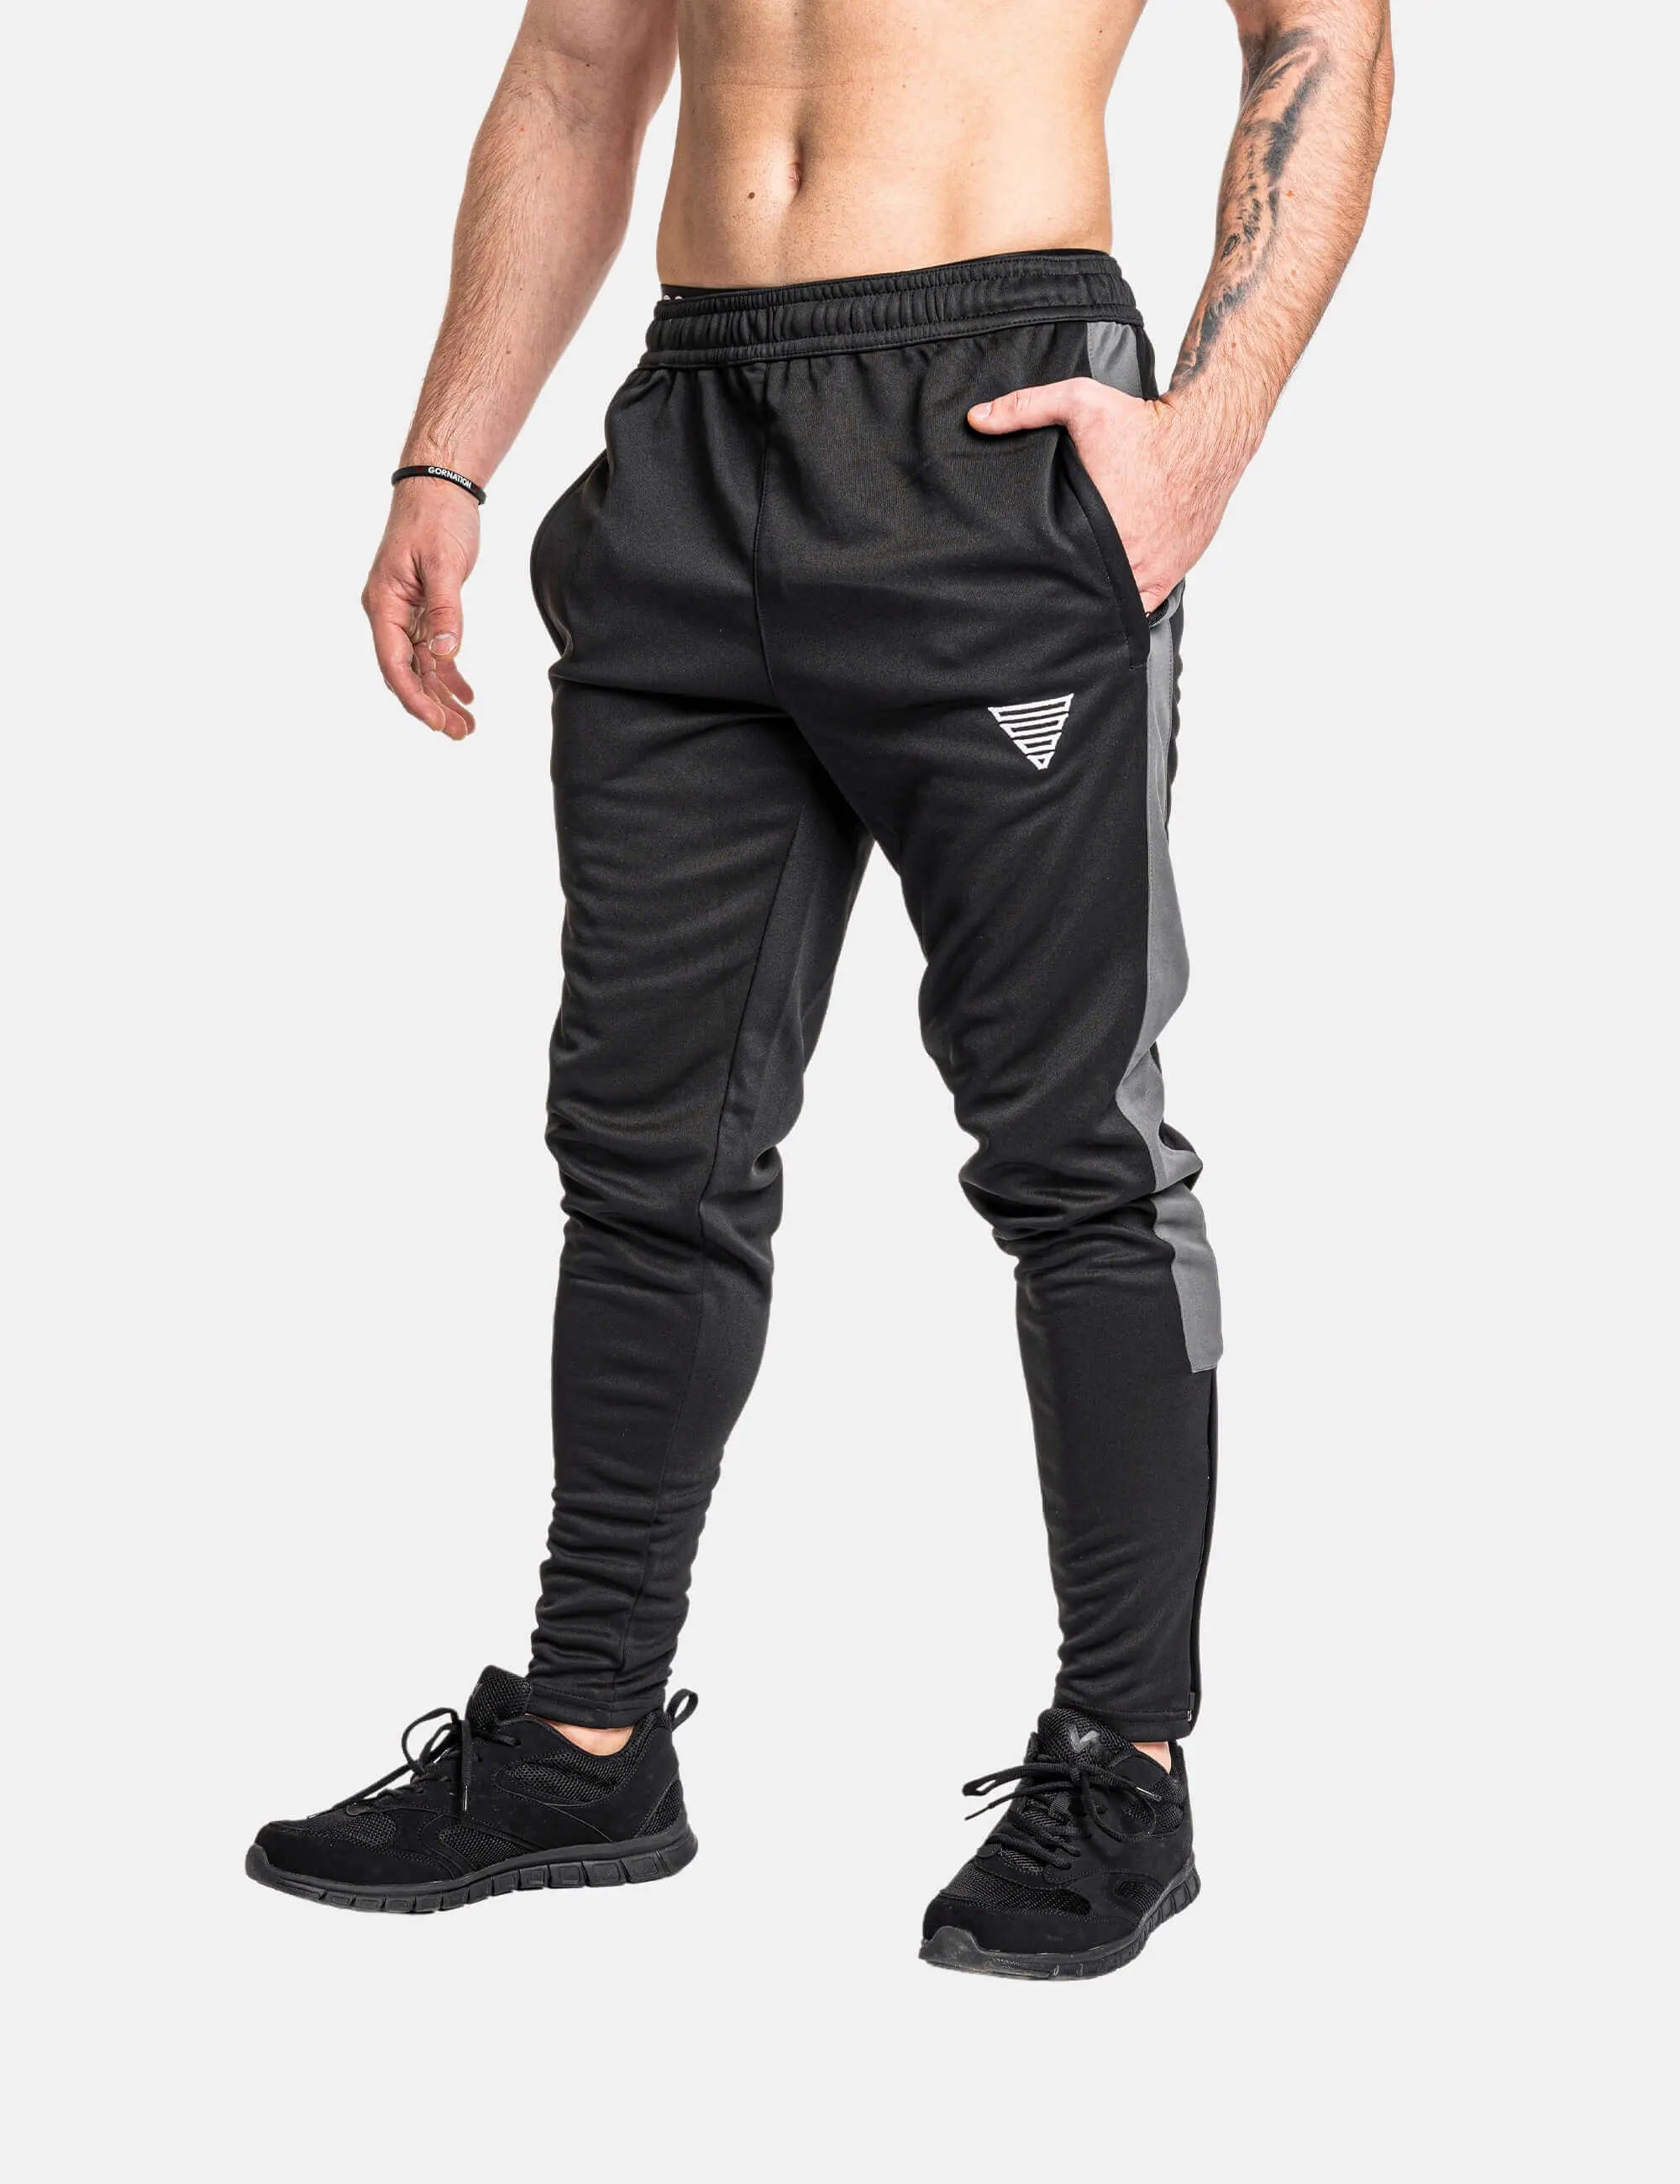 Calisthenics Performance Pants For Your Workout